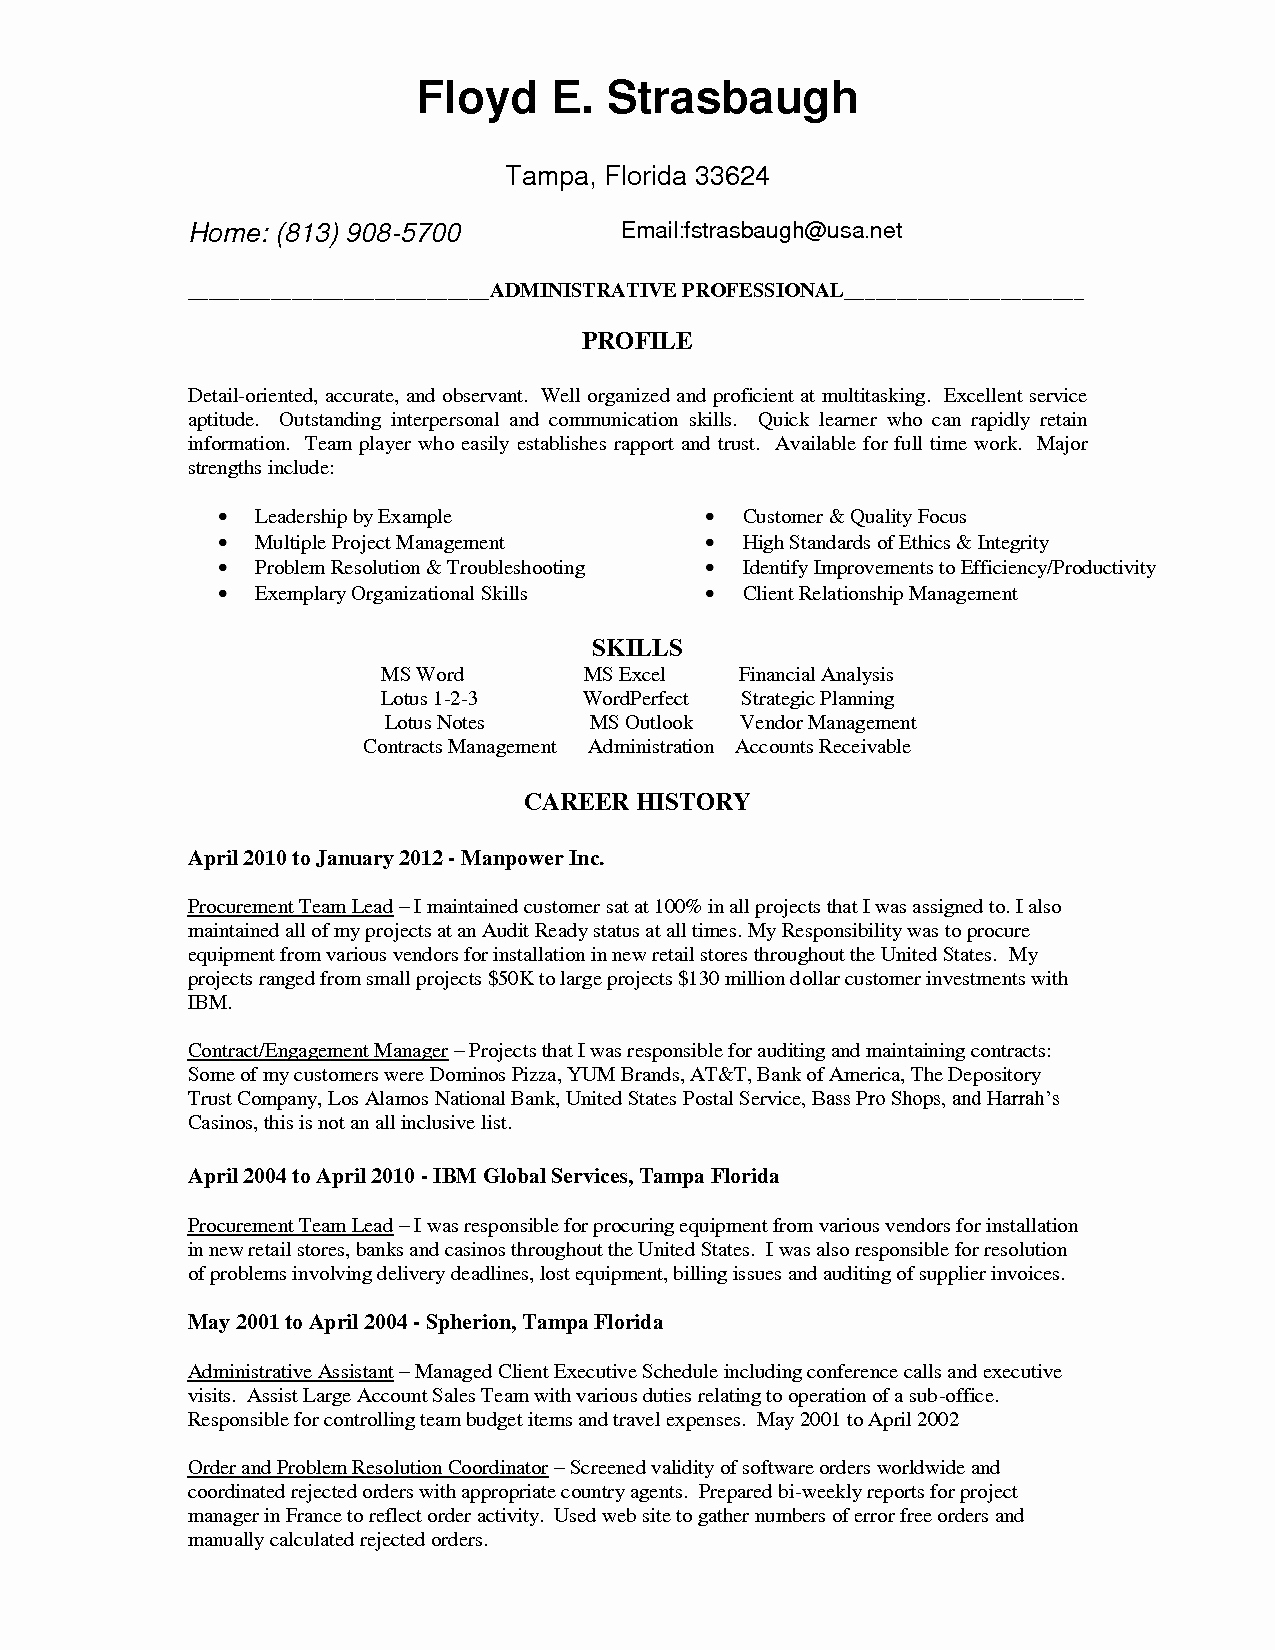 Sales associate Cover Letter Template - 20 Retail Sales associate Cover Letter